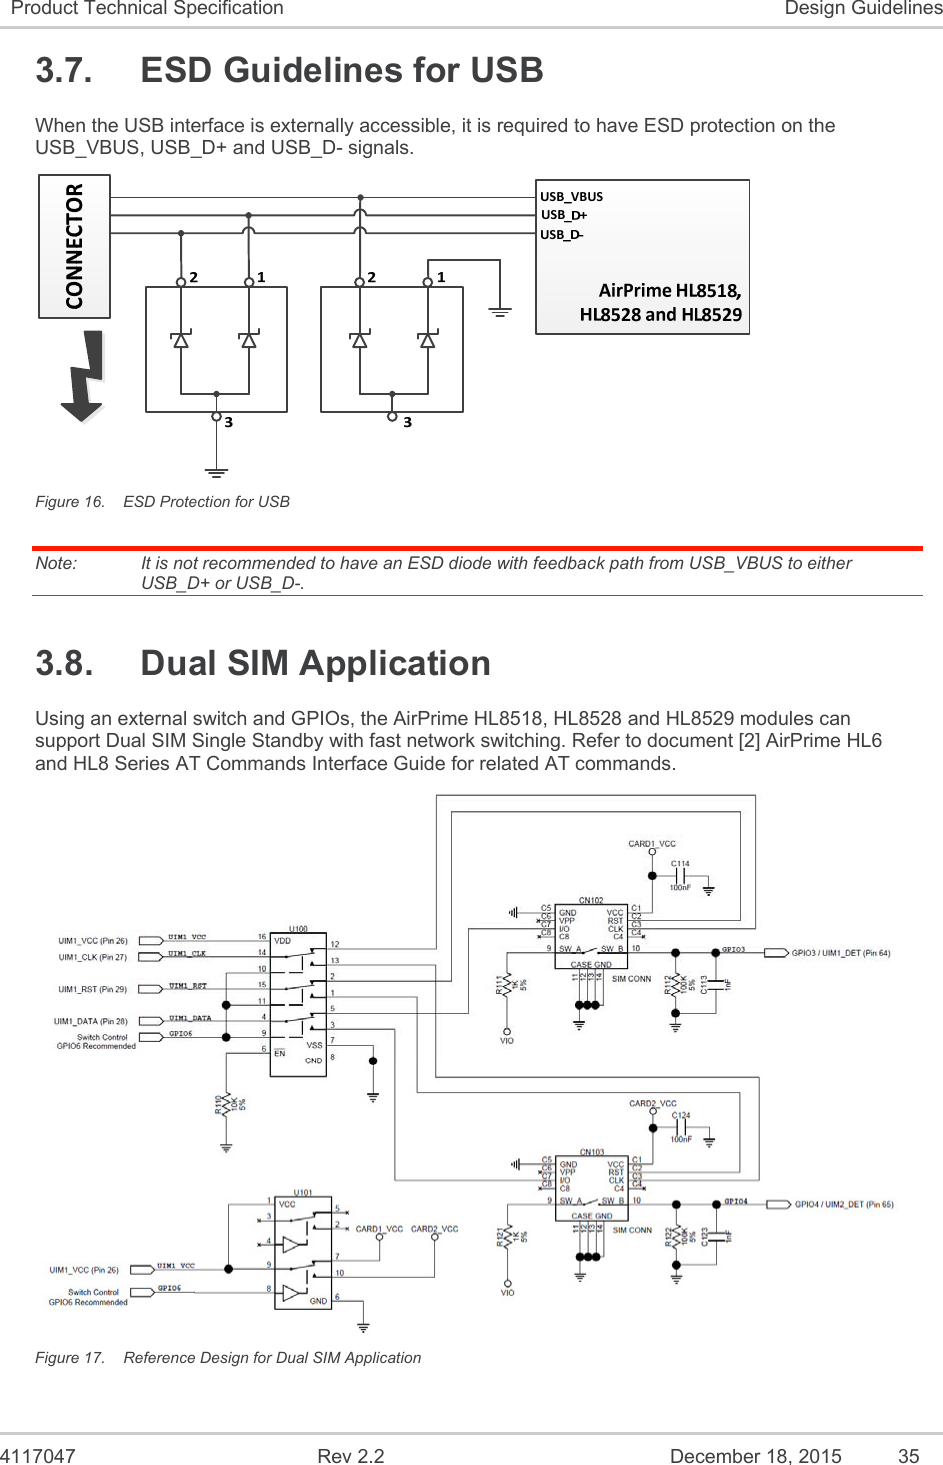  4117047  Rev 2.2  December 18, 2015  35 Product Technical Specification  Design Guidelines 3.7.  ESD Guidelines for USB When the USB interface is externally accessible, it is required to have ESD protection on the USB_VBUS, USB_D+ and USB_D- signals.  Figure 16.  ESD Protection for USB Note:   It is not recommended to have an ESD diode with feedback path from USB_VBUS to either USB_D+ or USB_D-. 3.8.  Dual SIM Application Using an external switch and GPIOs, the AirPrime HL8518, HL8528 and HL8529 modules can support Dual SIM Single Standby with fast network switching. Refer to document [2] AirPrime HL6 and HL8 Series AT Commands Interface Guide for related AT commands.  Figure 17.  Reference Design for Dual SIM Application 